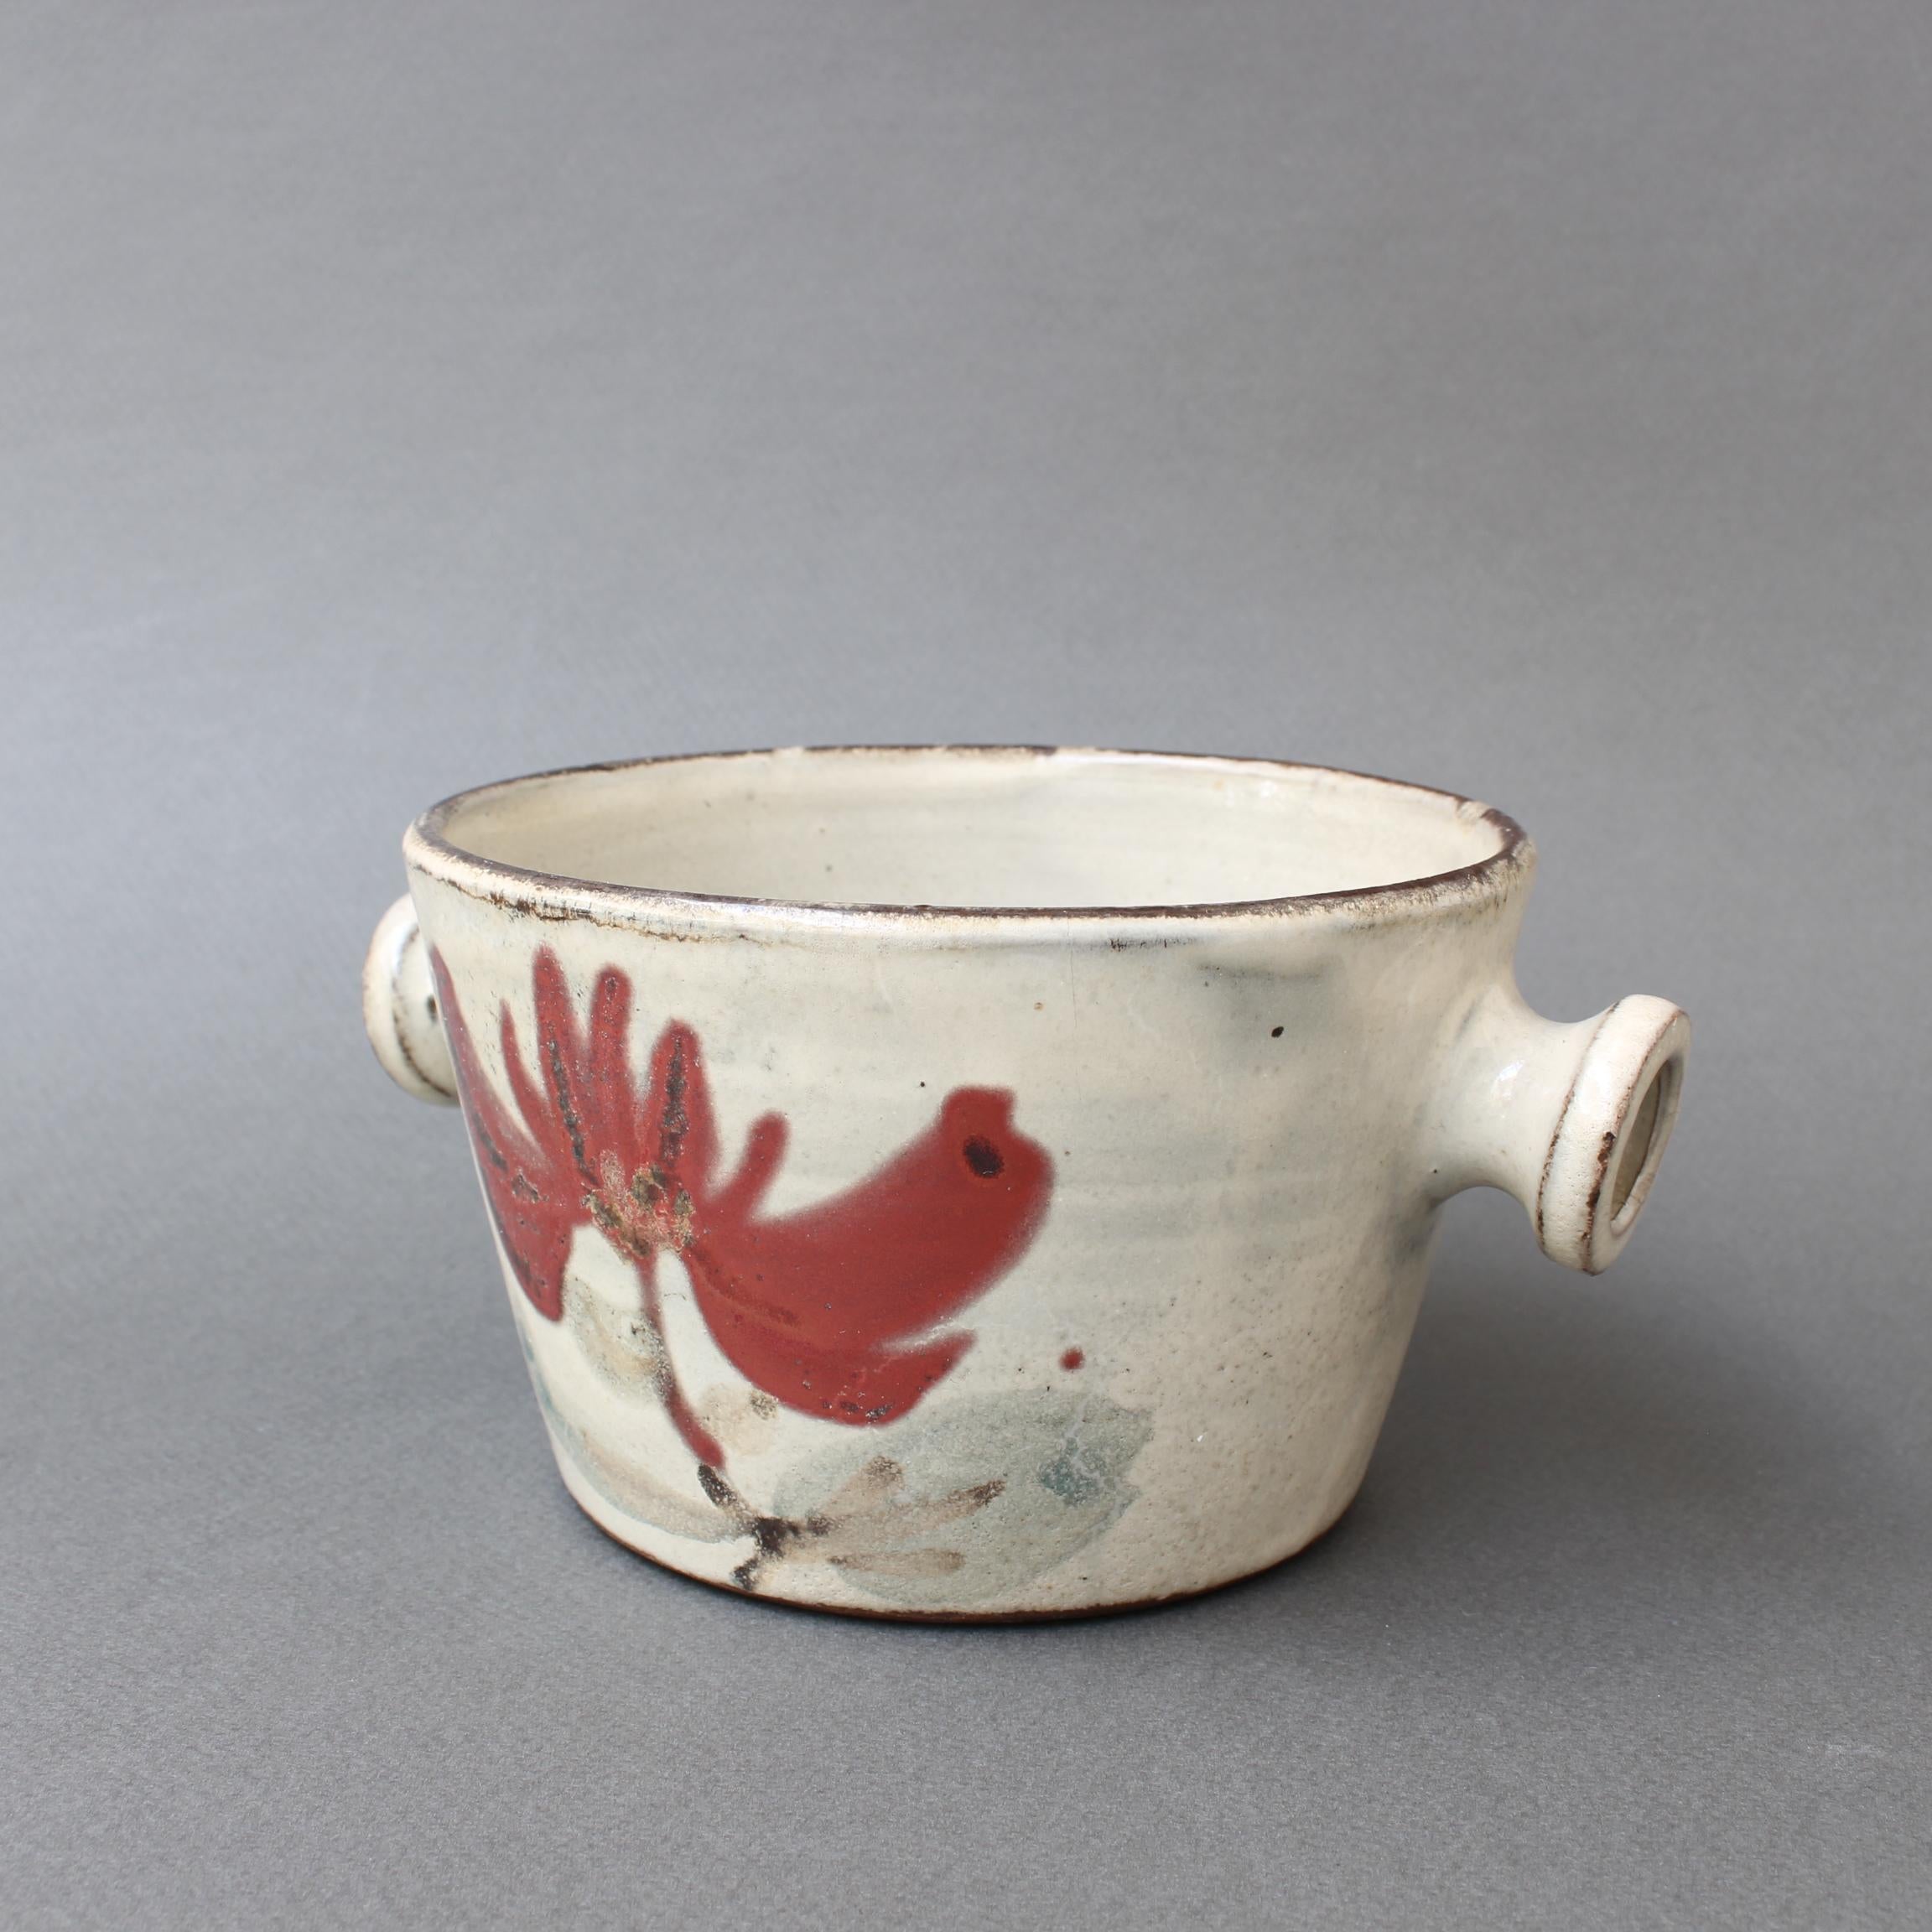 Small midcentury French ceramic decorative crockery pot by Gustave Reynaud for Le Mûrier (circa 1950s). An inviting diminutive piece with Reynaud's signature style, chalk-white color base with flower and foliage painted motif. In excellent vintage